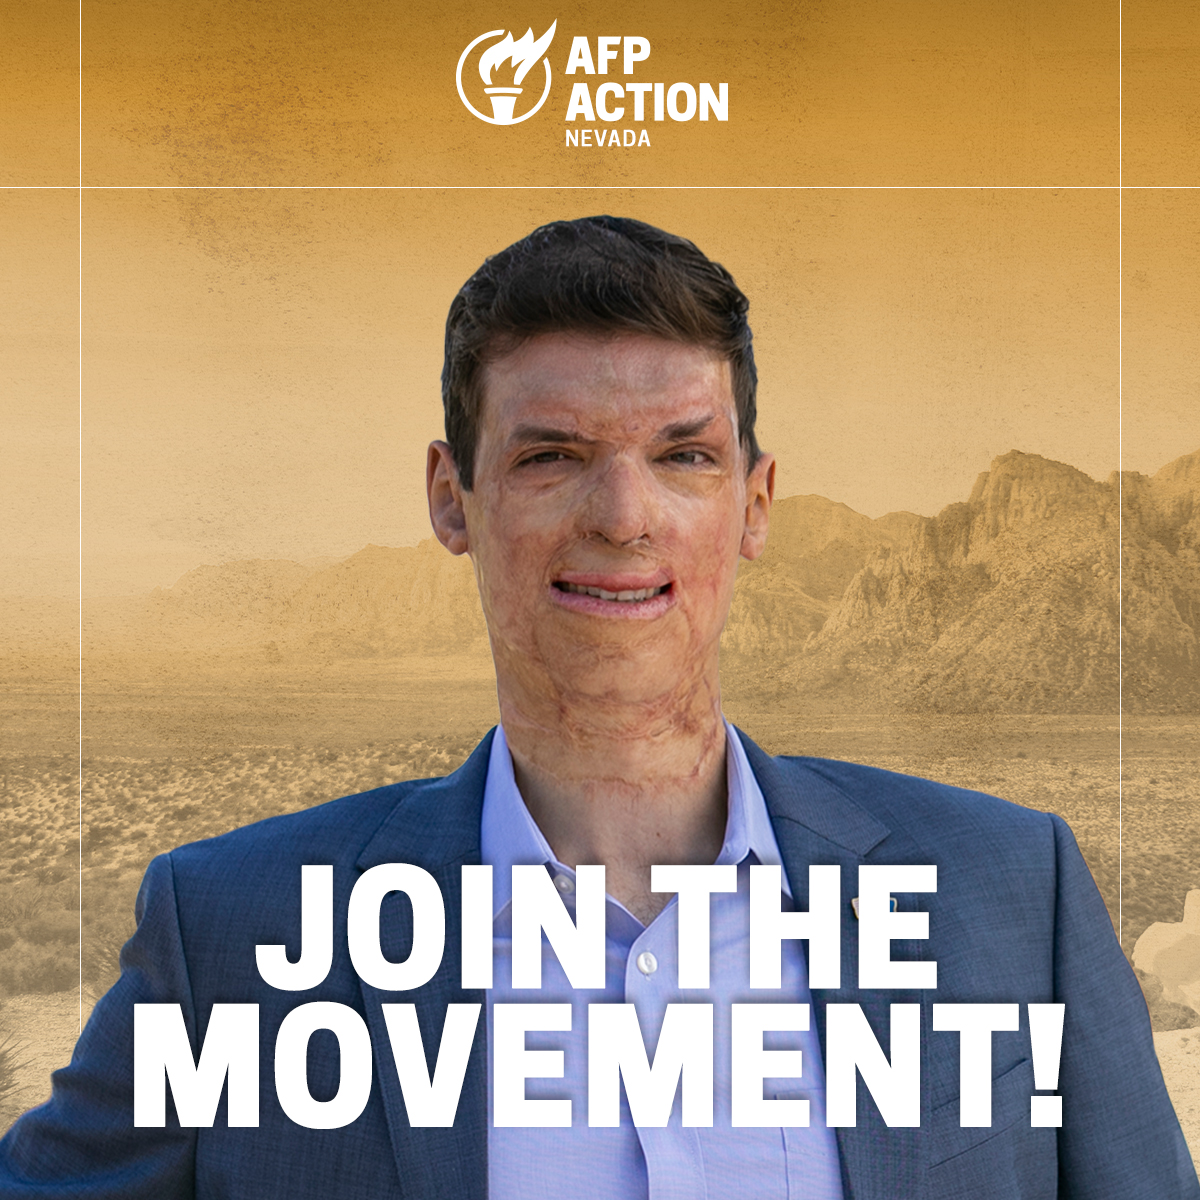 .@CaptainSamBrown has spent his life serving our nation honorably. He values America and its freedoms deeply, and he’s not done serving yet, which is why he is running to be Nevada’s next U.S. Senator! Check out our new Race Page to learn more! afpaction.com/race/nevada-se…